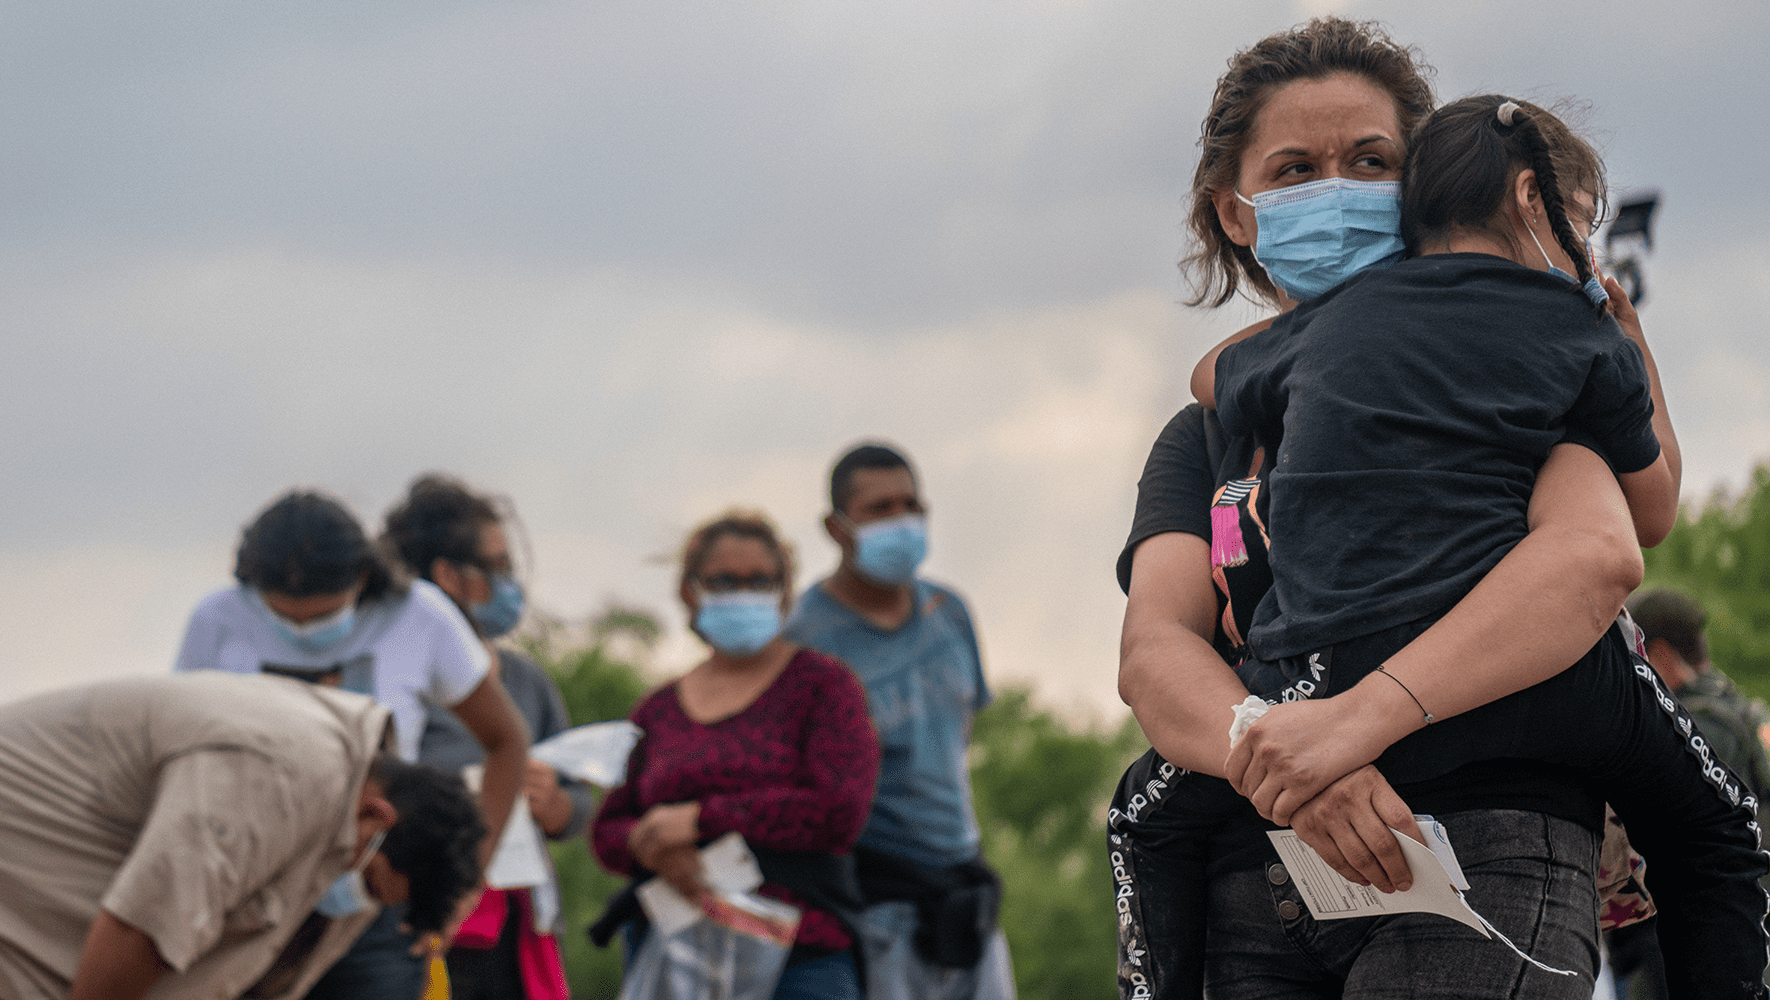 El Salvadorian migrants Yesenia Martinez and her daughter Jaretzy wait alongside other migrants to be processed after crossing the Rio Grande into the U.S. on May 03, 2022 in La Joya, Texas. (Brandon Bell/Getty Images)